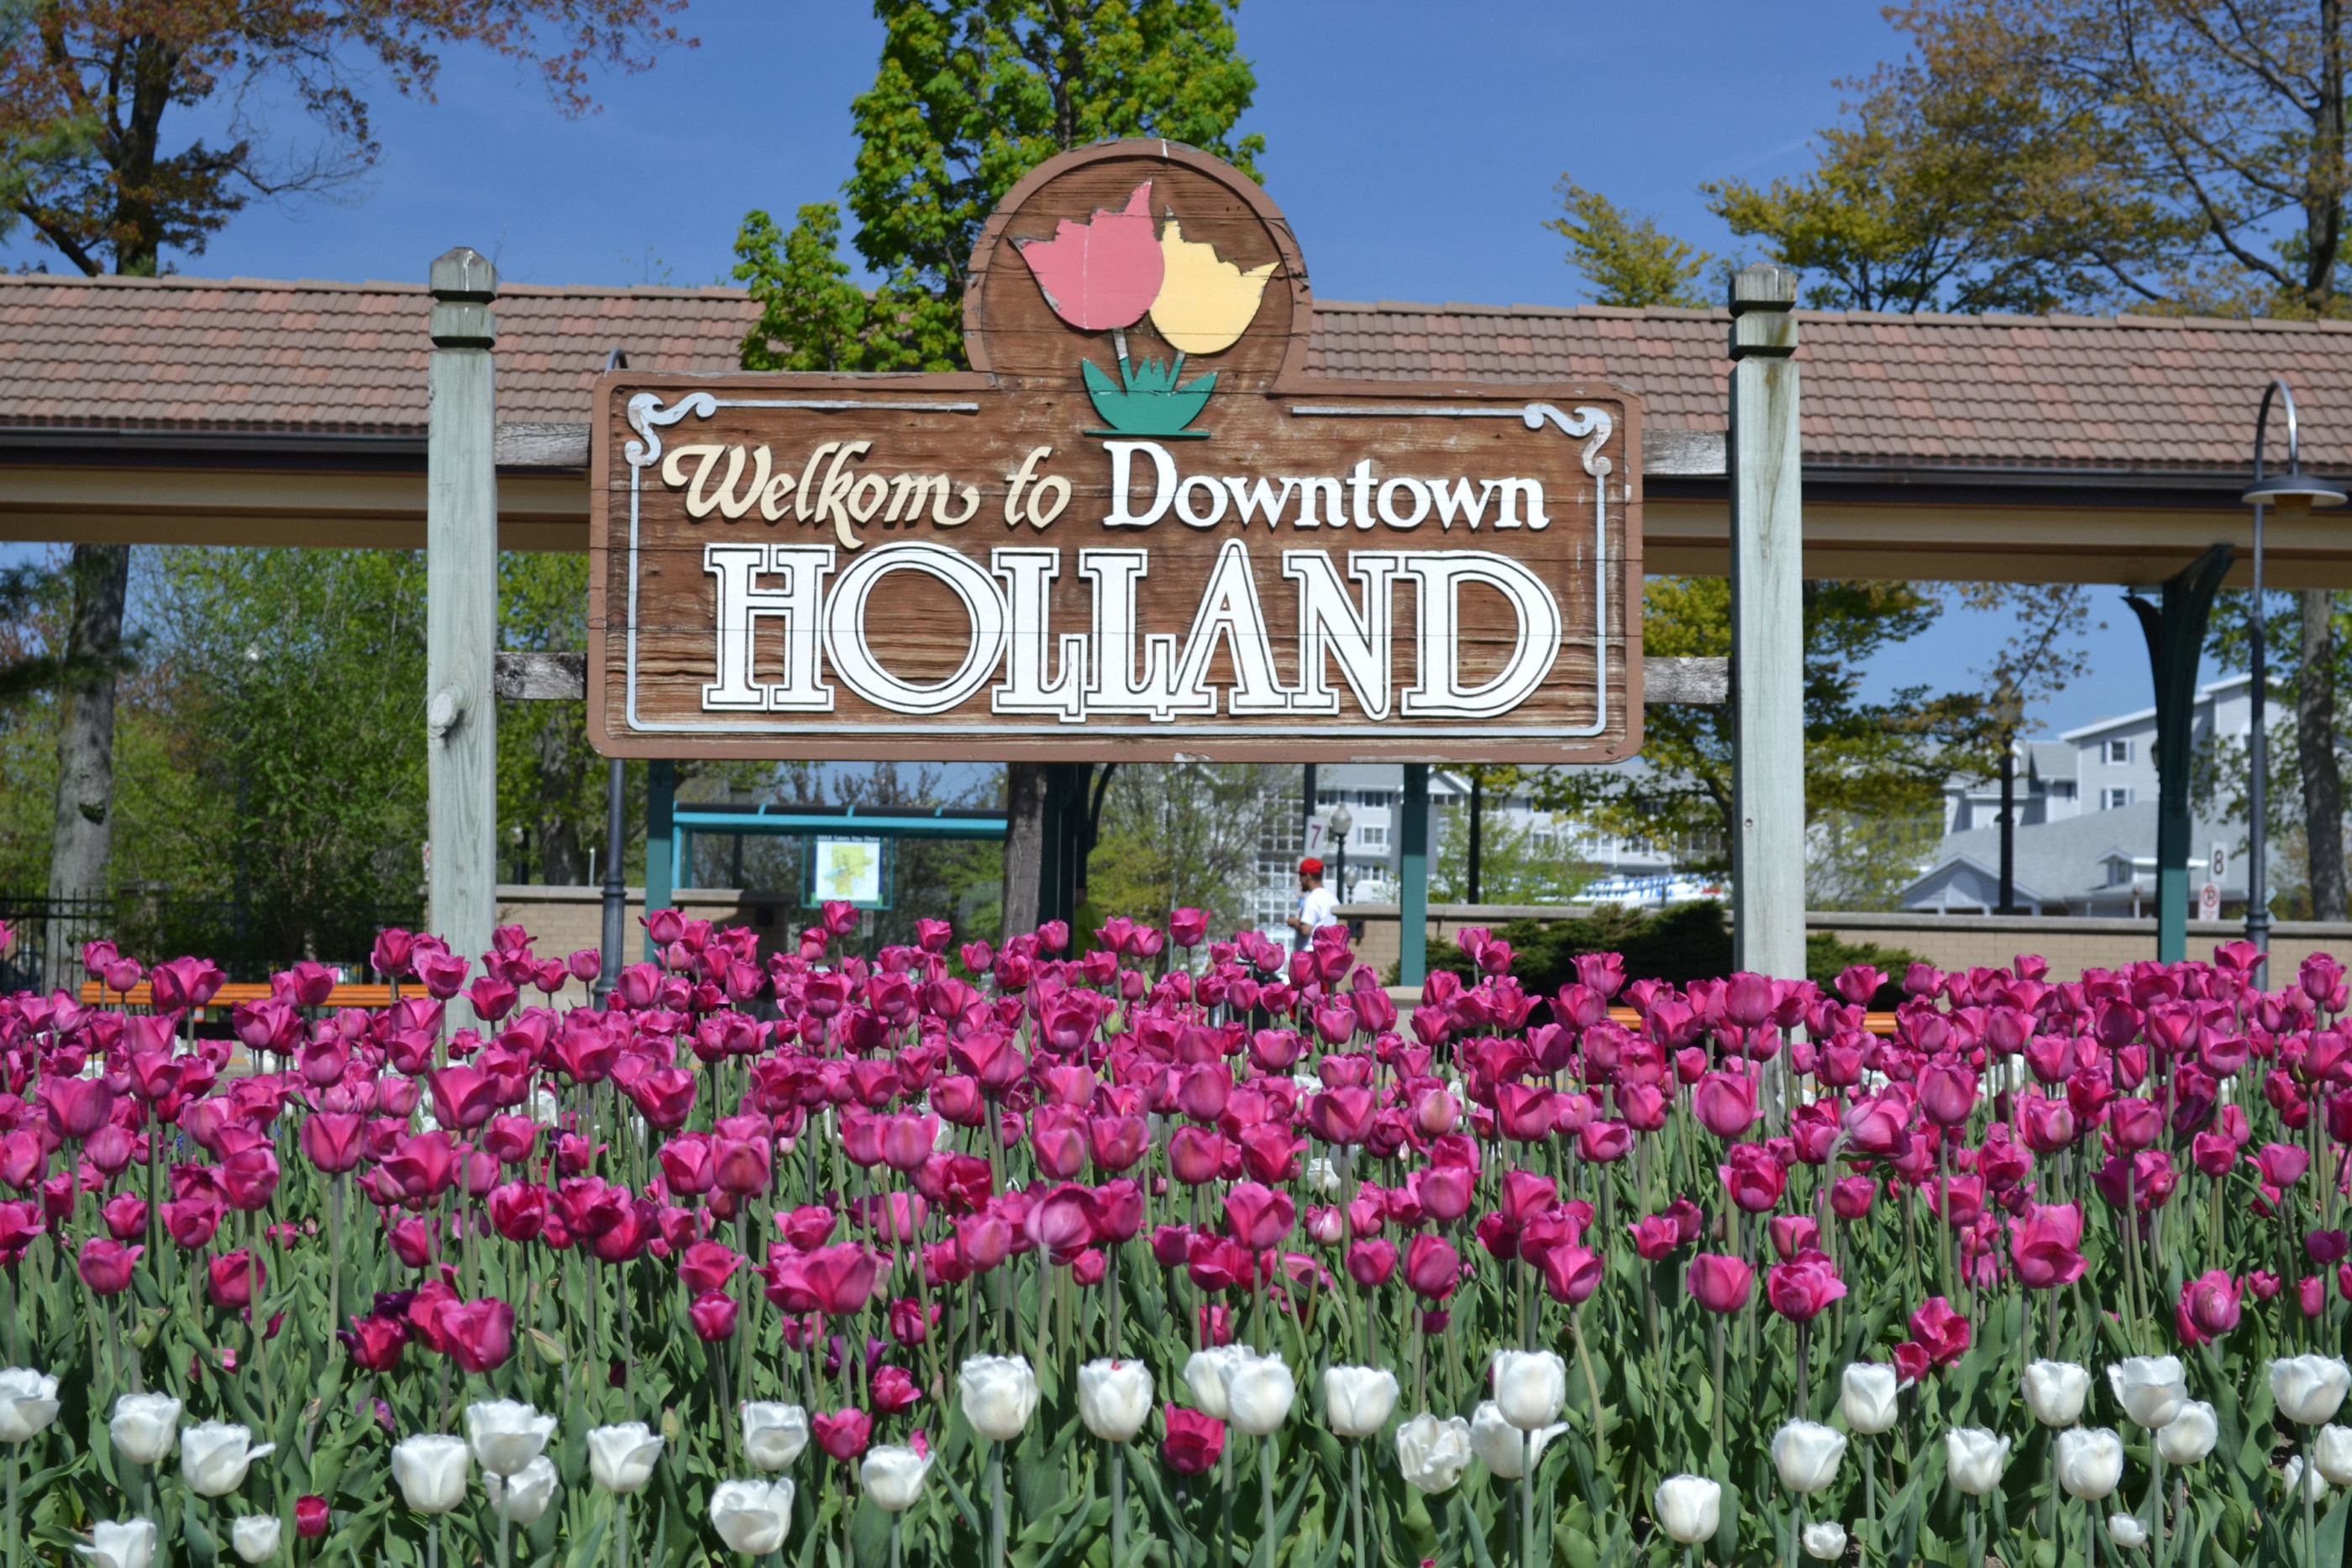 A patch of purple tulips in bloom in front of the Welkom to Holland sign